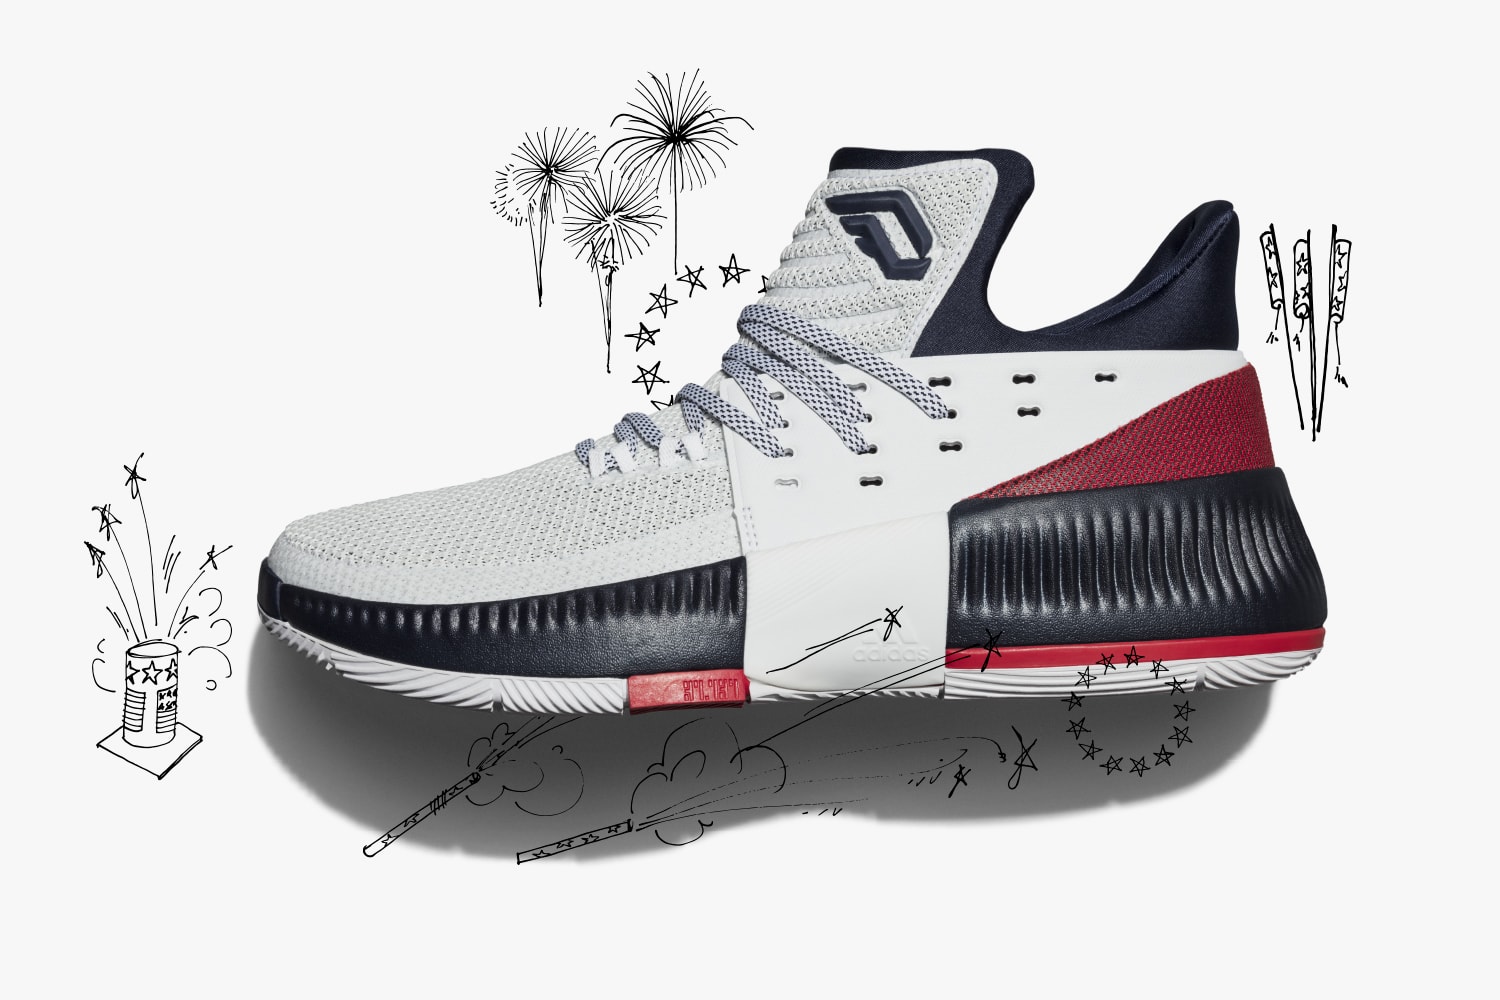 adidas Harden Vol 1 Dame 3 2017 Summer Colorways cactus red white blue damian lillard james basketball sneakers shoes static releases